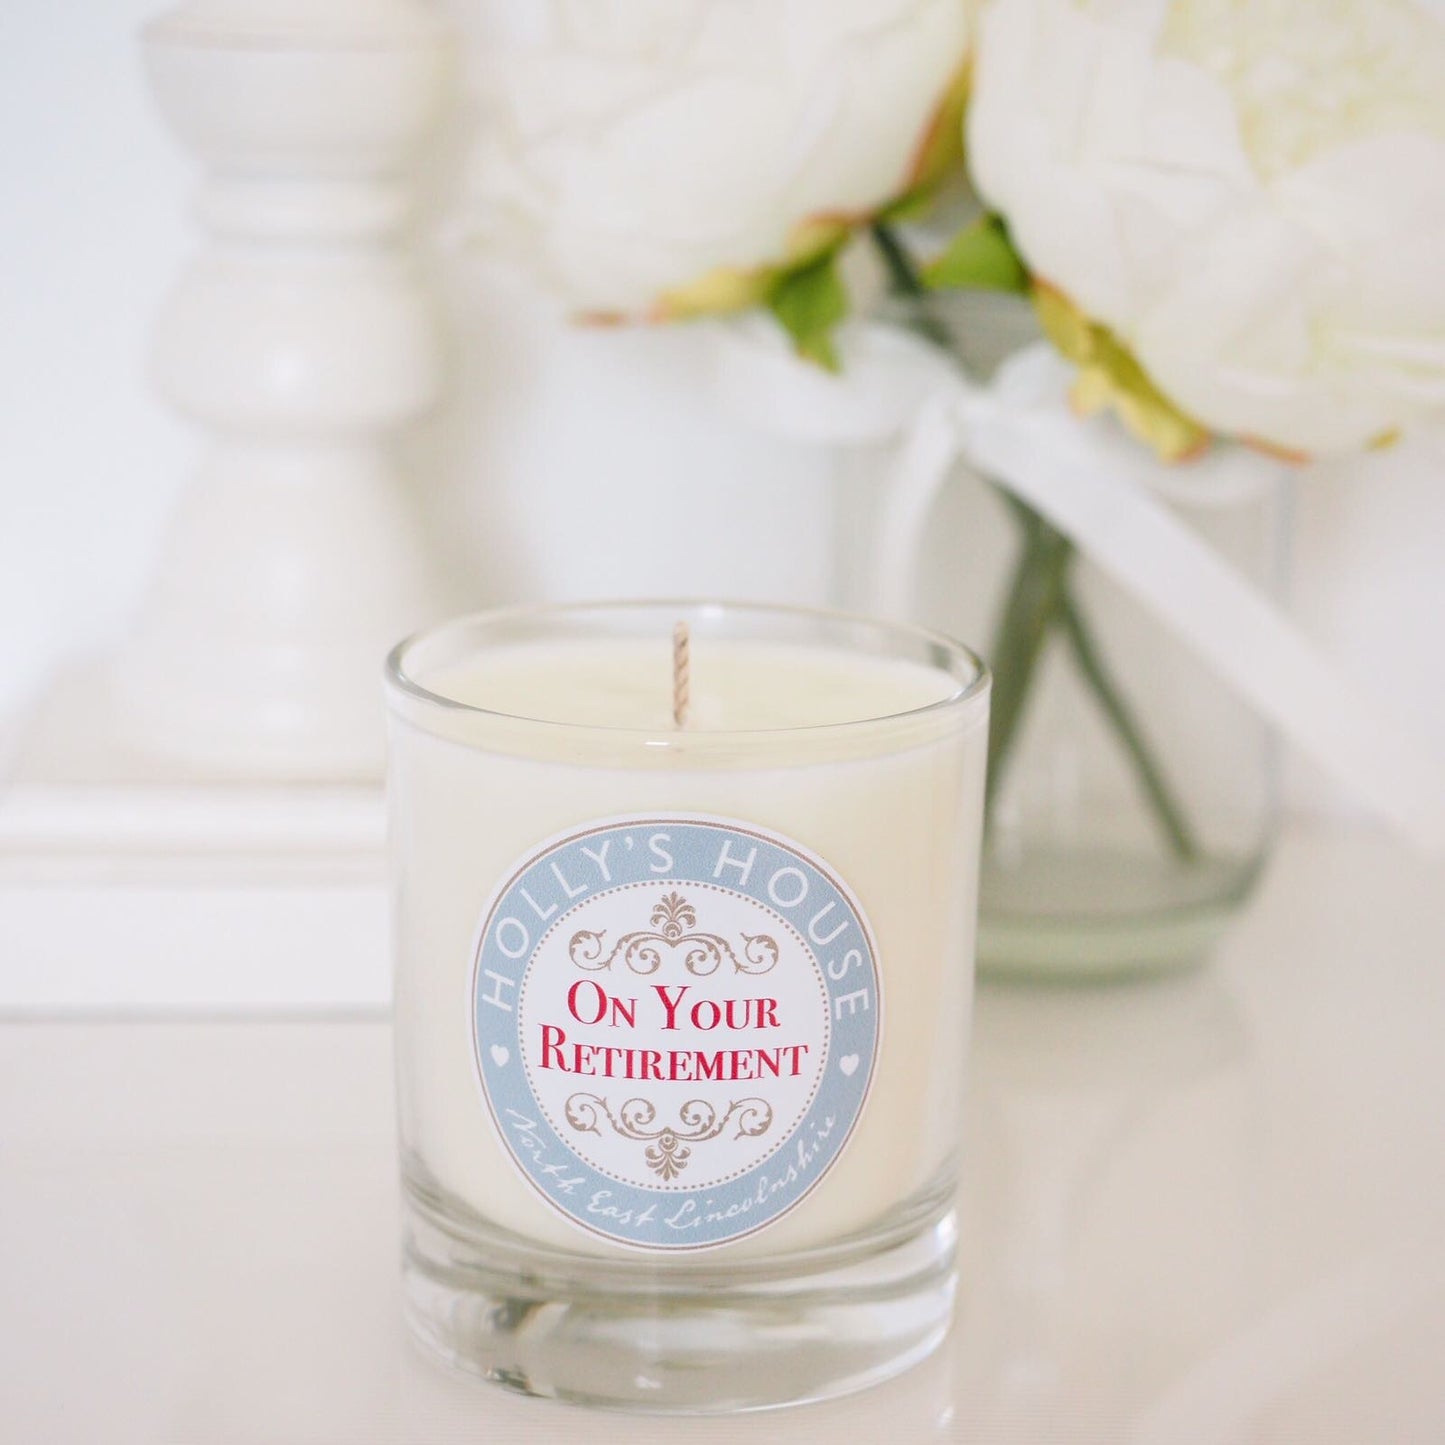 On Your Retirement Scented Candle